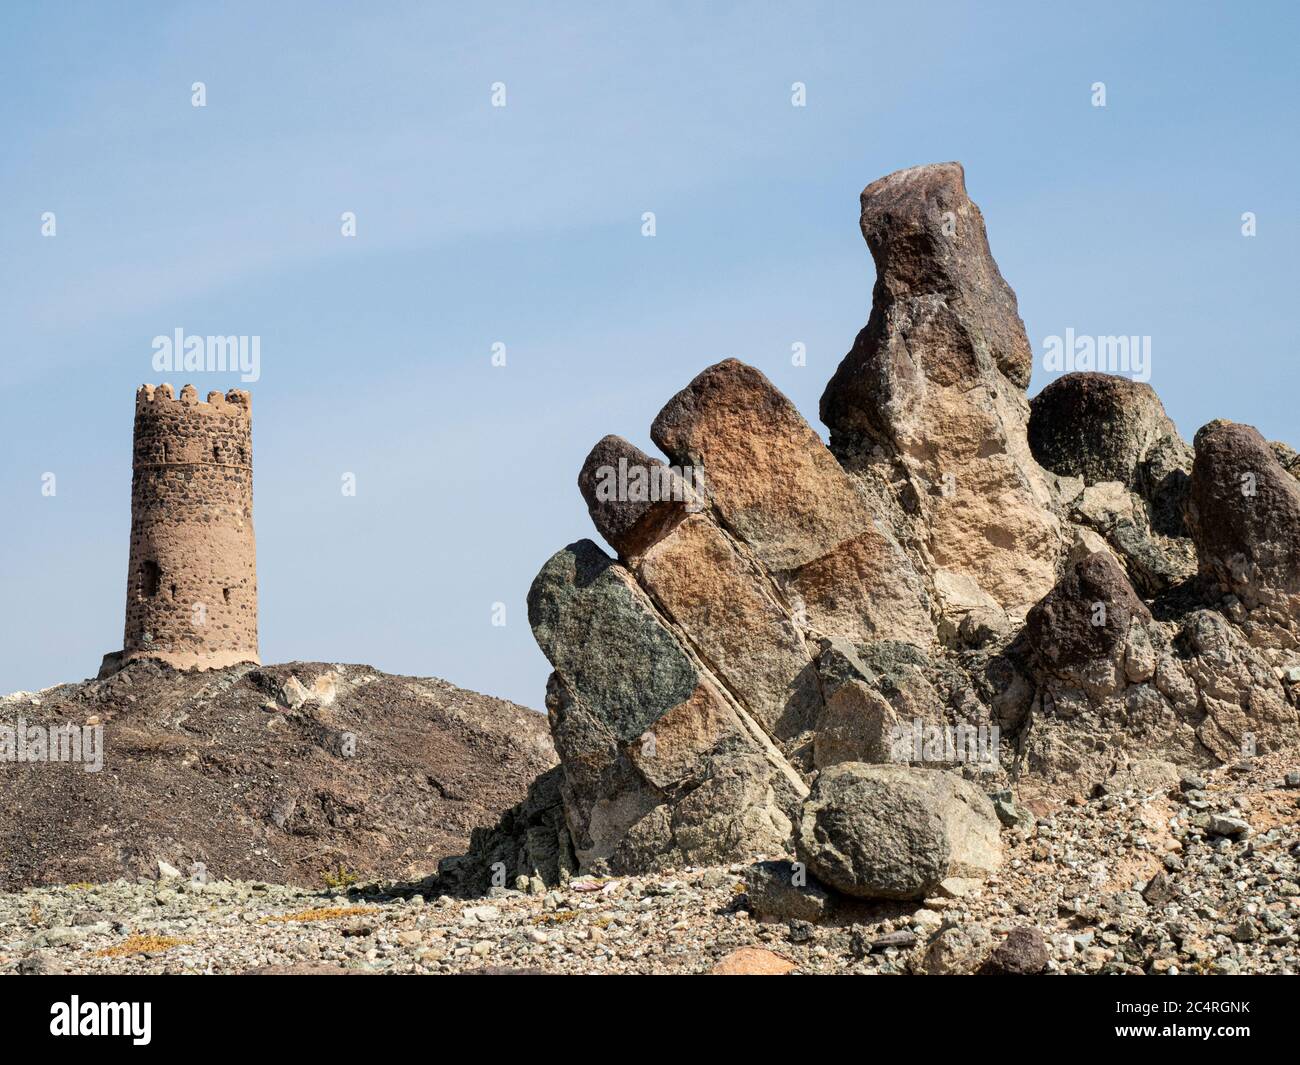 Remains of the mud and clay watch towers in the village of Mudayrib, Sultanate of Oman. Stock Photo